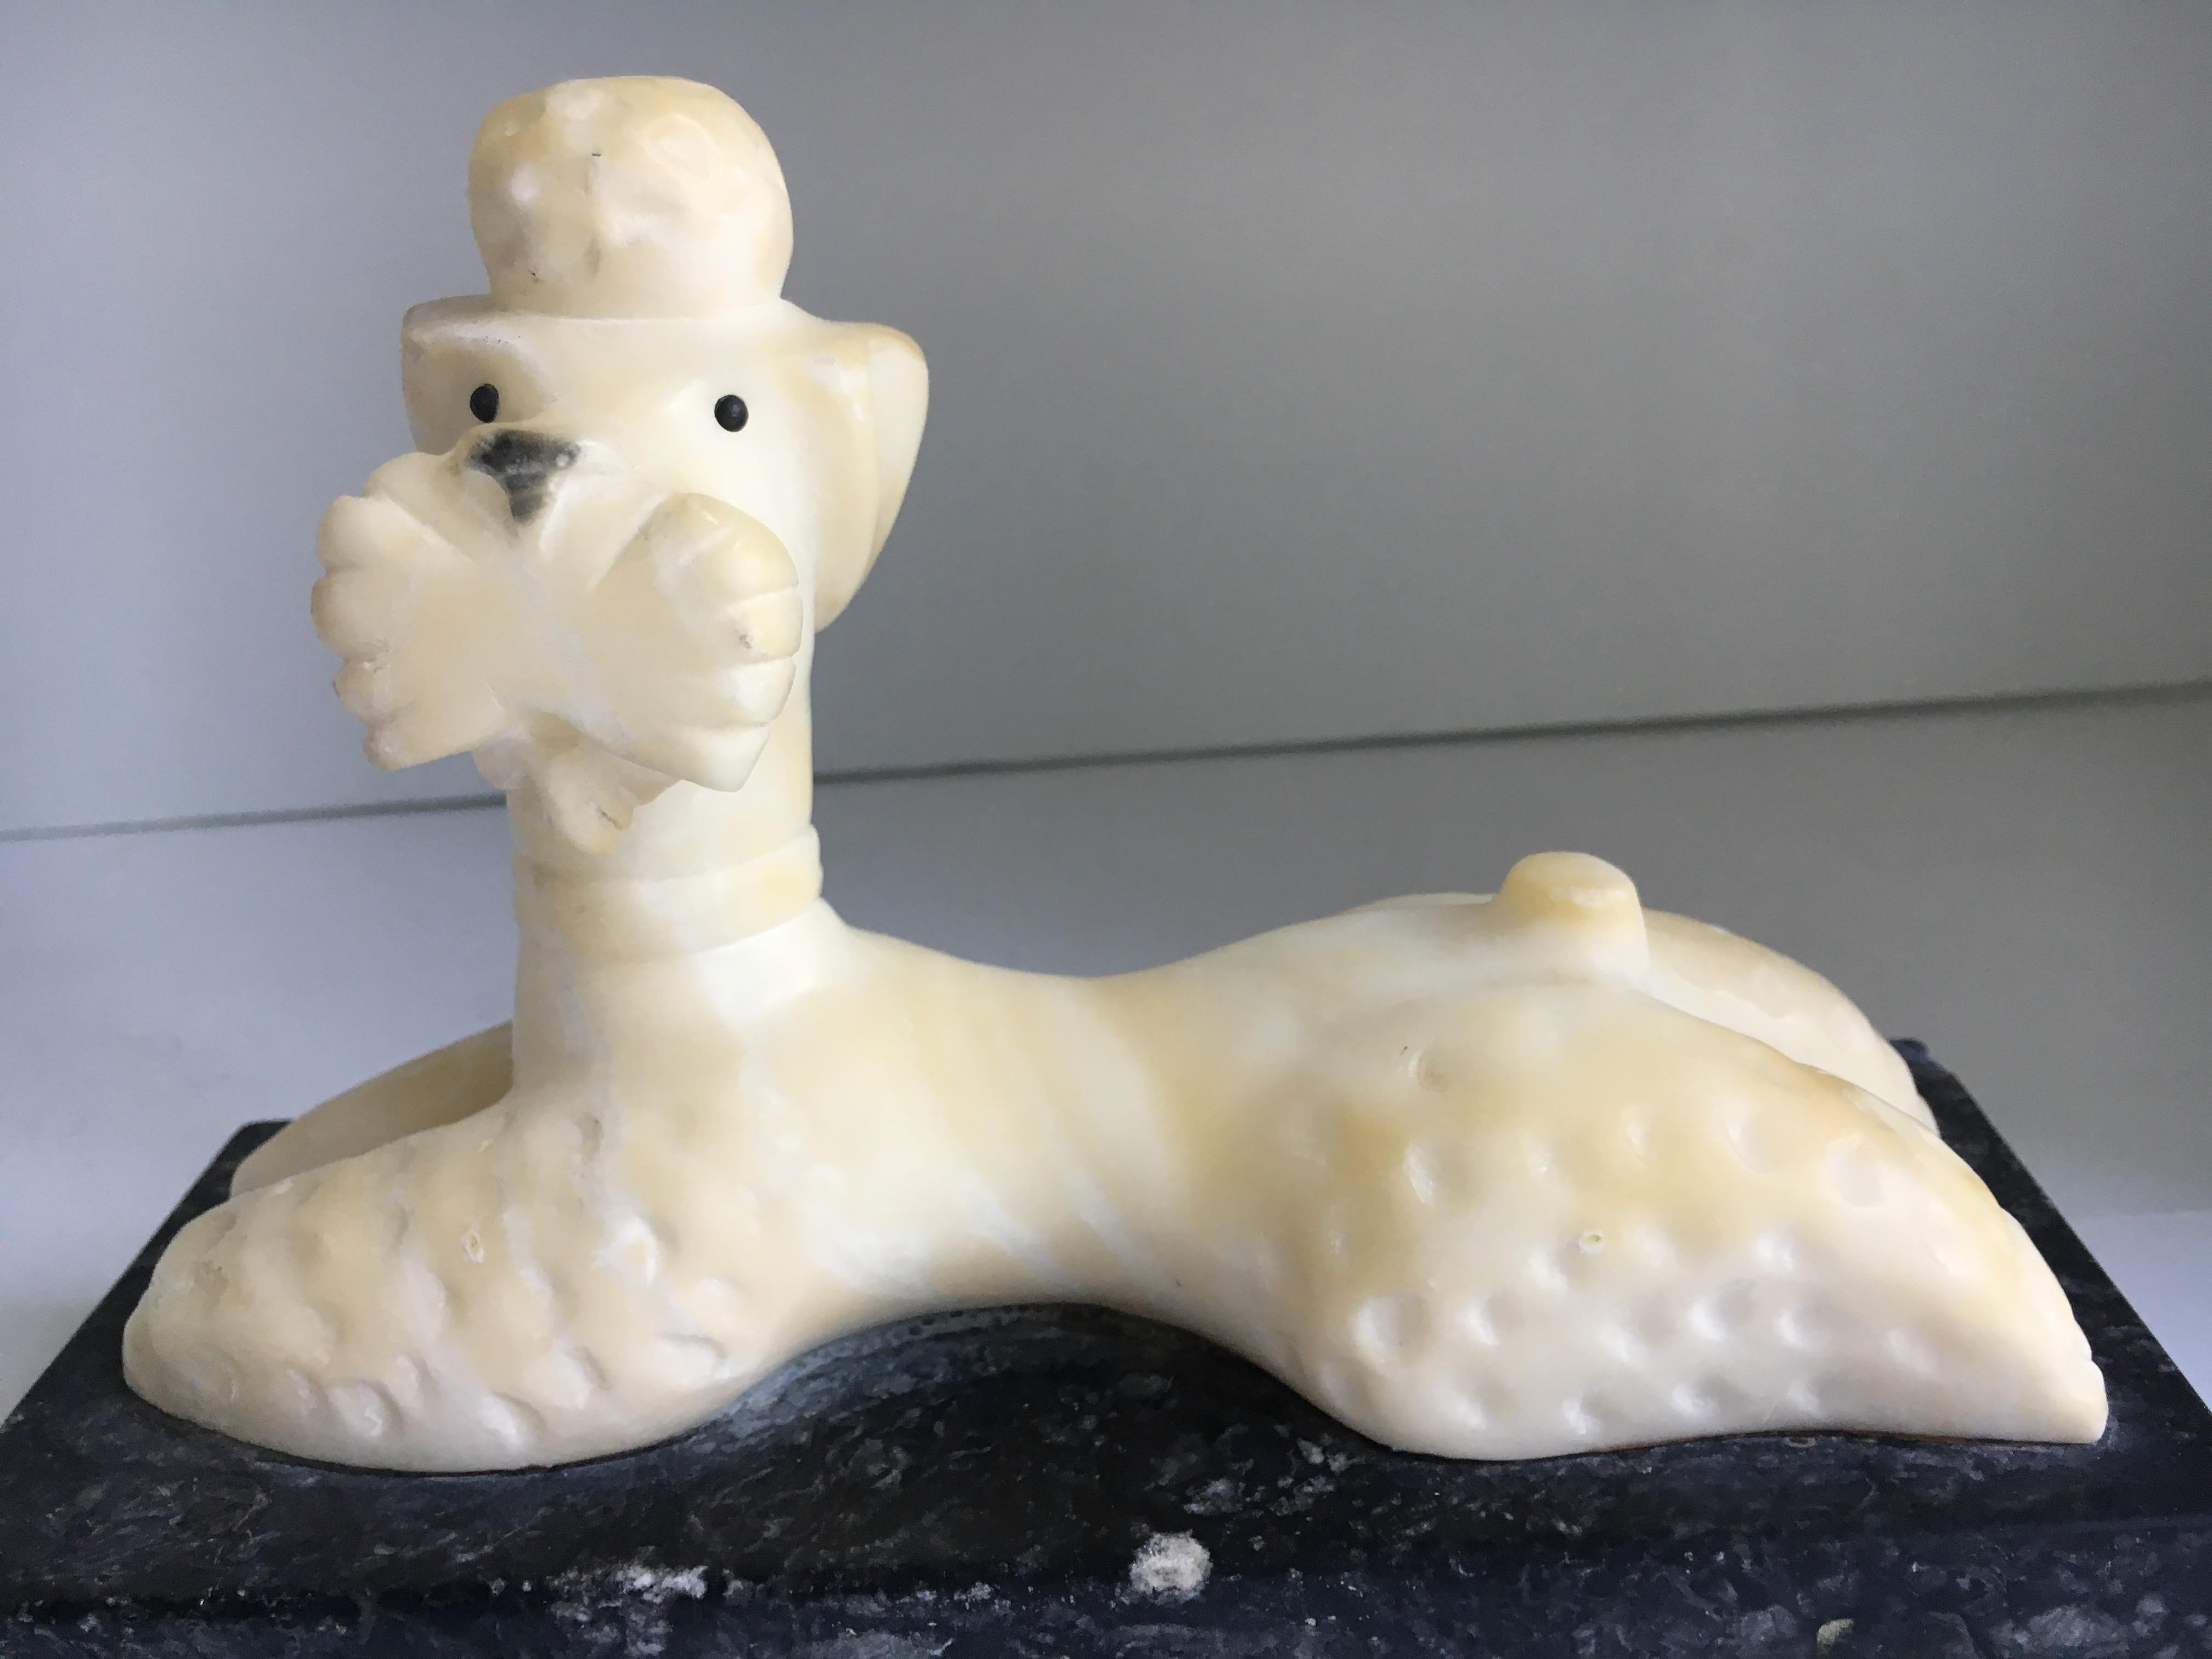 A white marble Poodle relaxing and stretched on a black marble base - perfect for the desk, especially for the dog enthusiast, veterinarian or Poodle aficionado! 

Could be used as a bookend, paper weight or simply as a decorative piece of